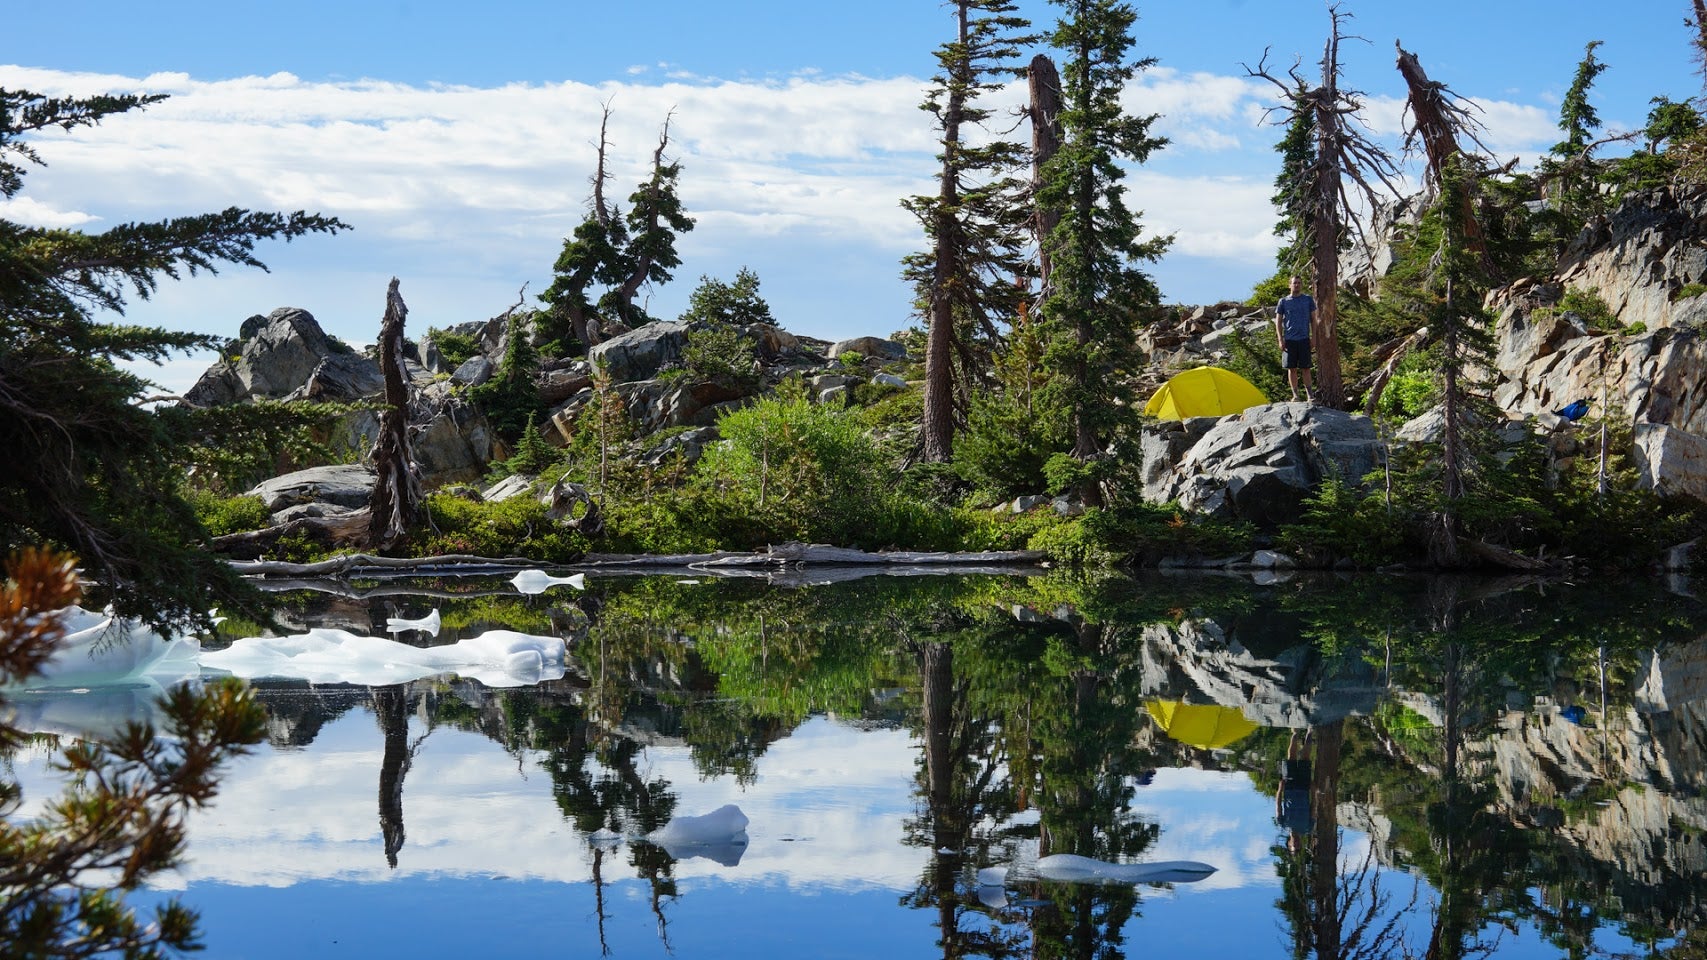 Camper submitted image from Desolation Wilderness - Aloha Zone - 2